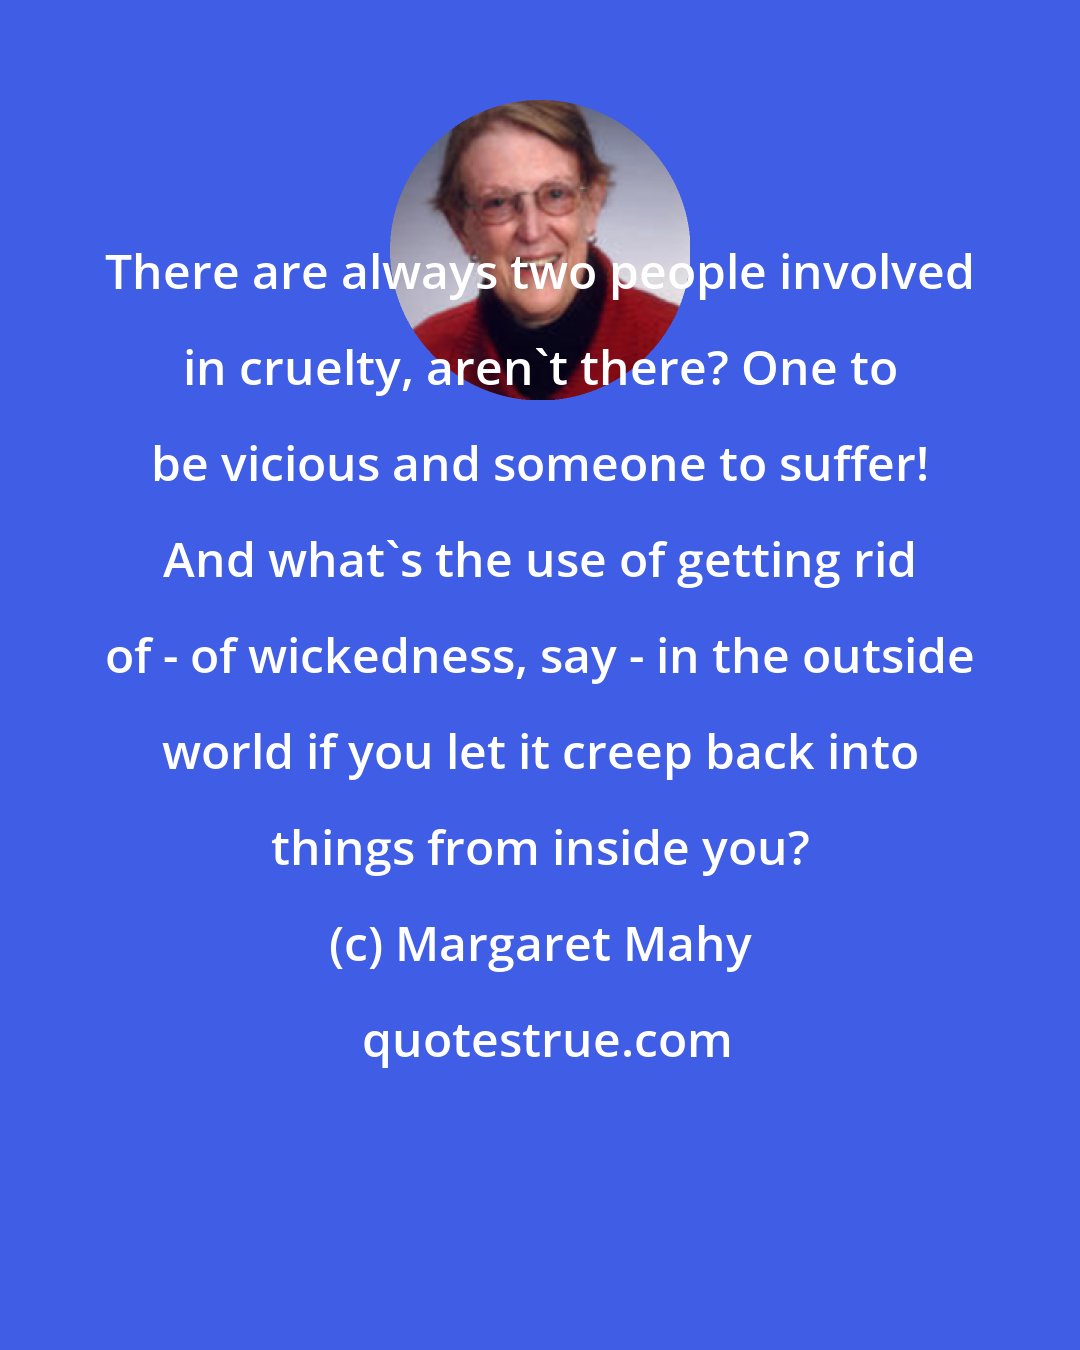 Margaret Mahy: There are always two people involved in cruelty, aren't there? One to be vicious and someone to suffer! And what's the use of getting rid of - of wickedness, say - in the outside world if you let it creep back into things from inside you?